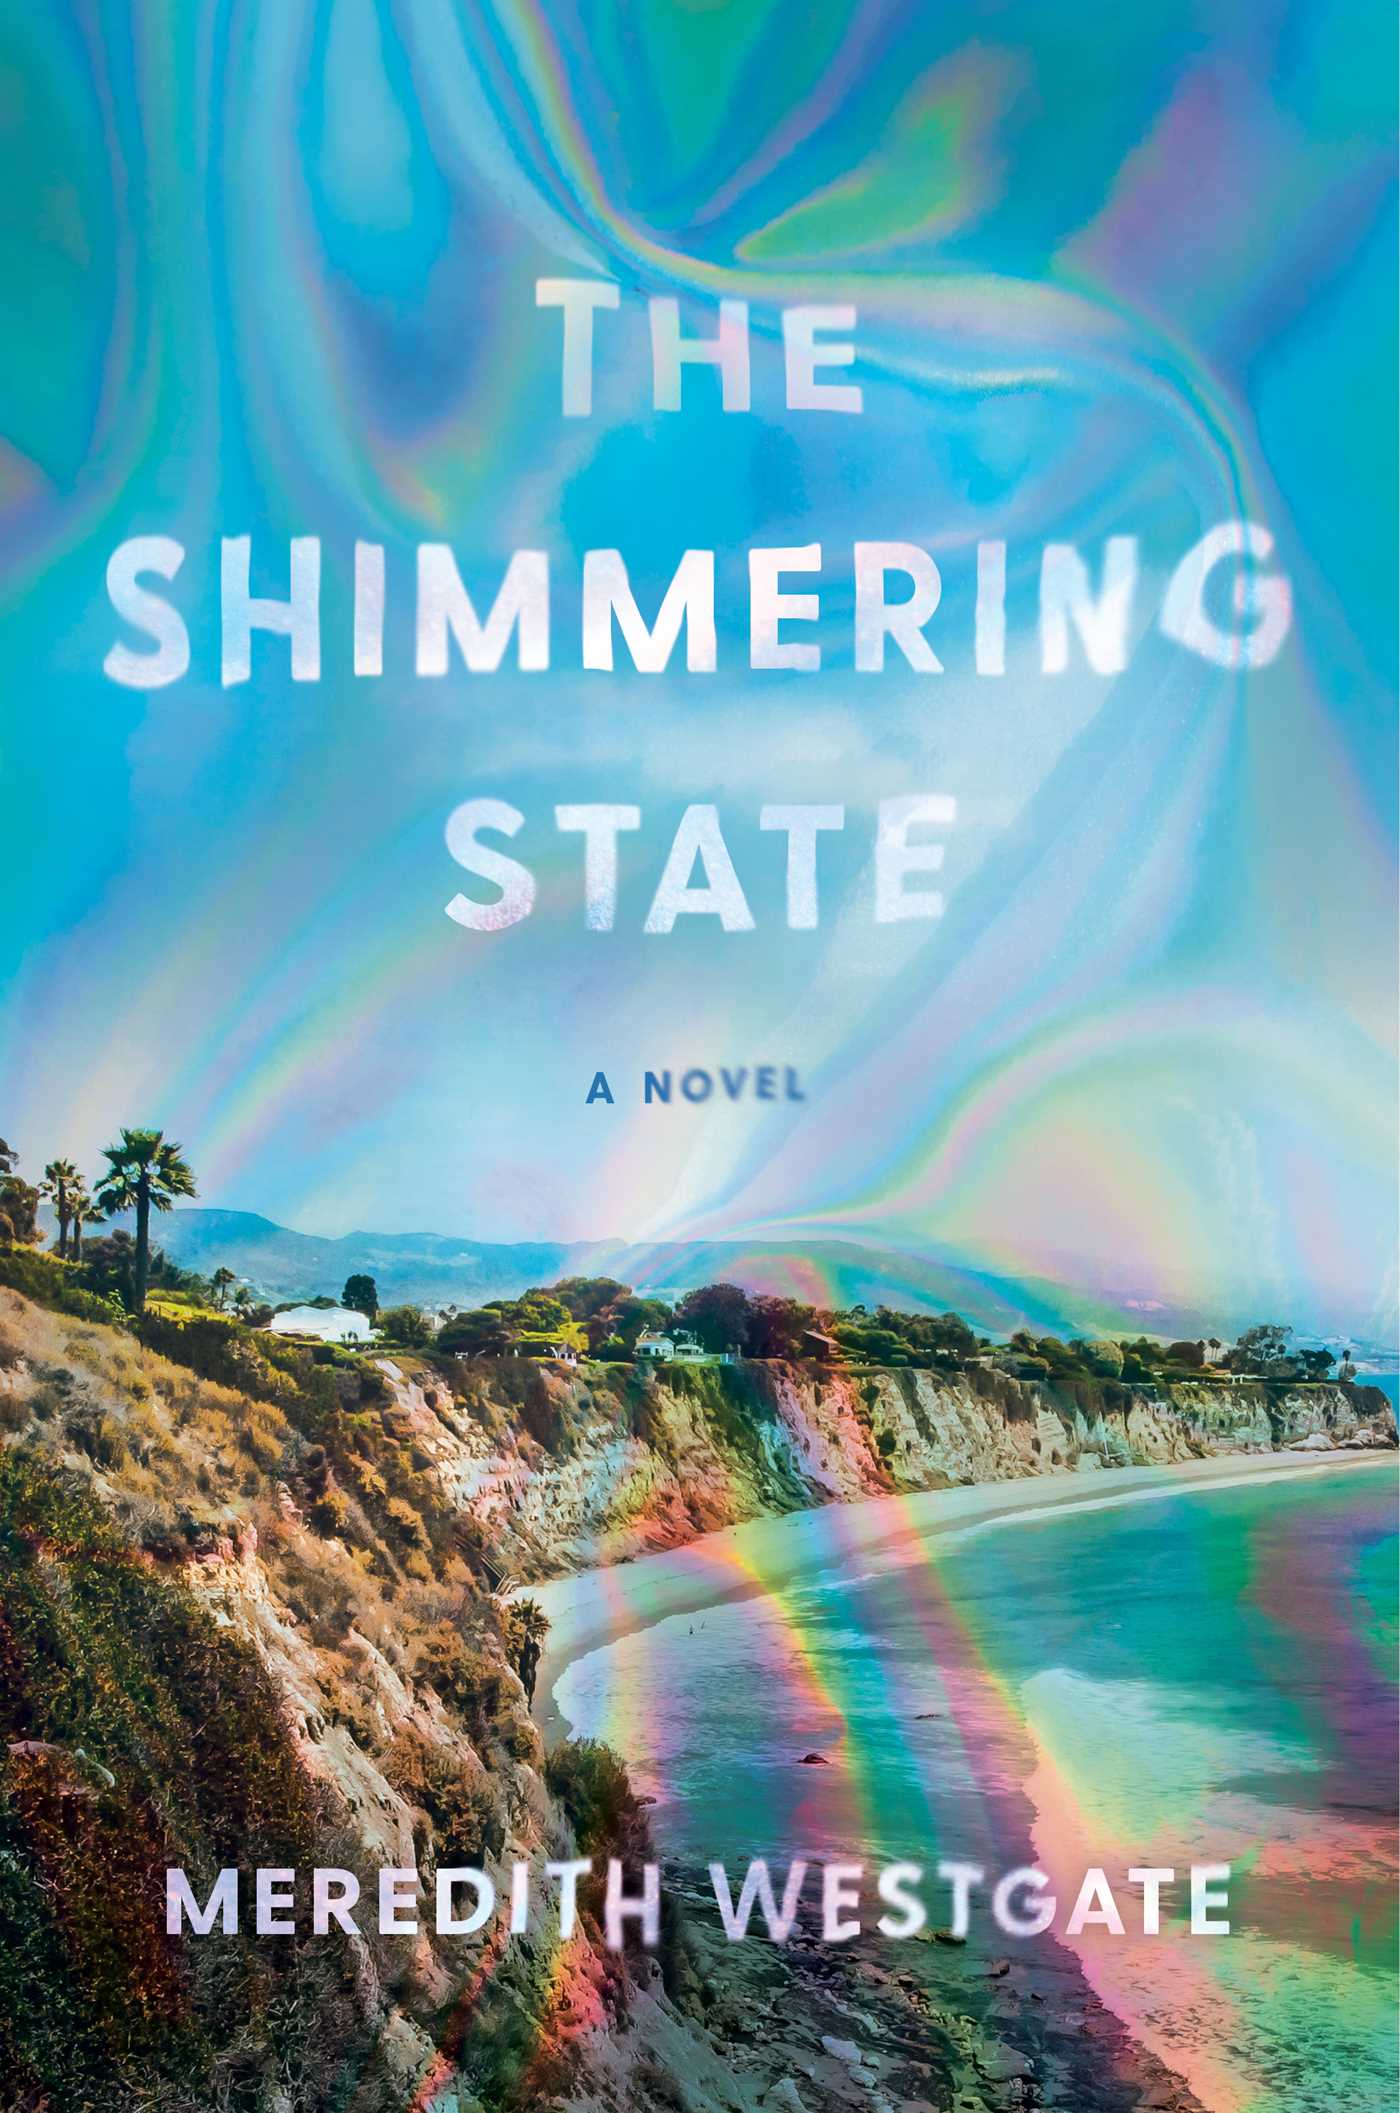 Book Launch: The Shimmering State by Meredith Westgate in conversation with Helen Schulman